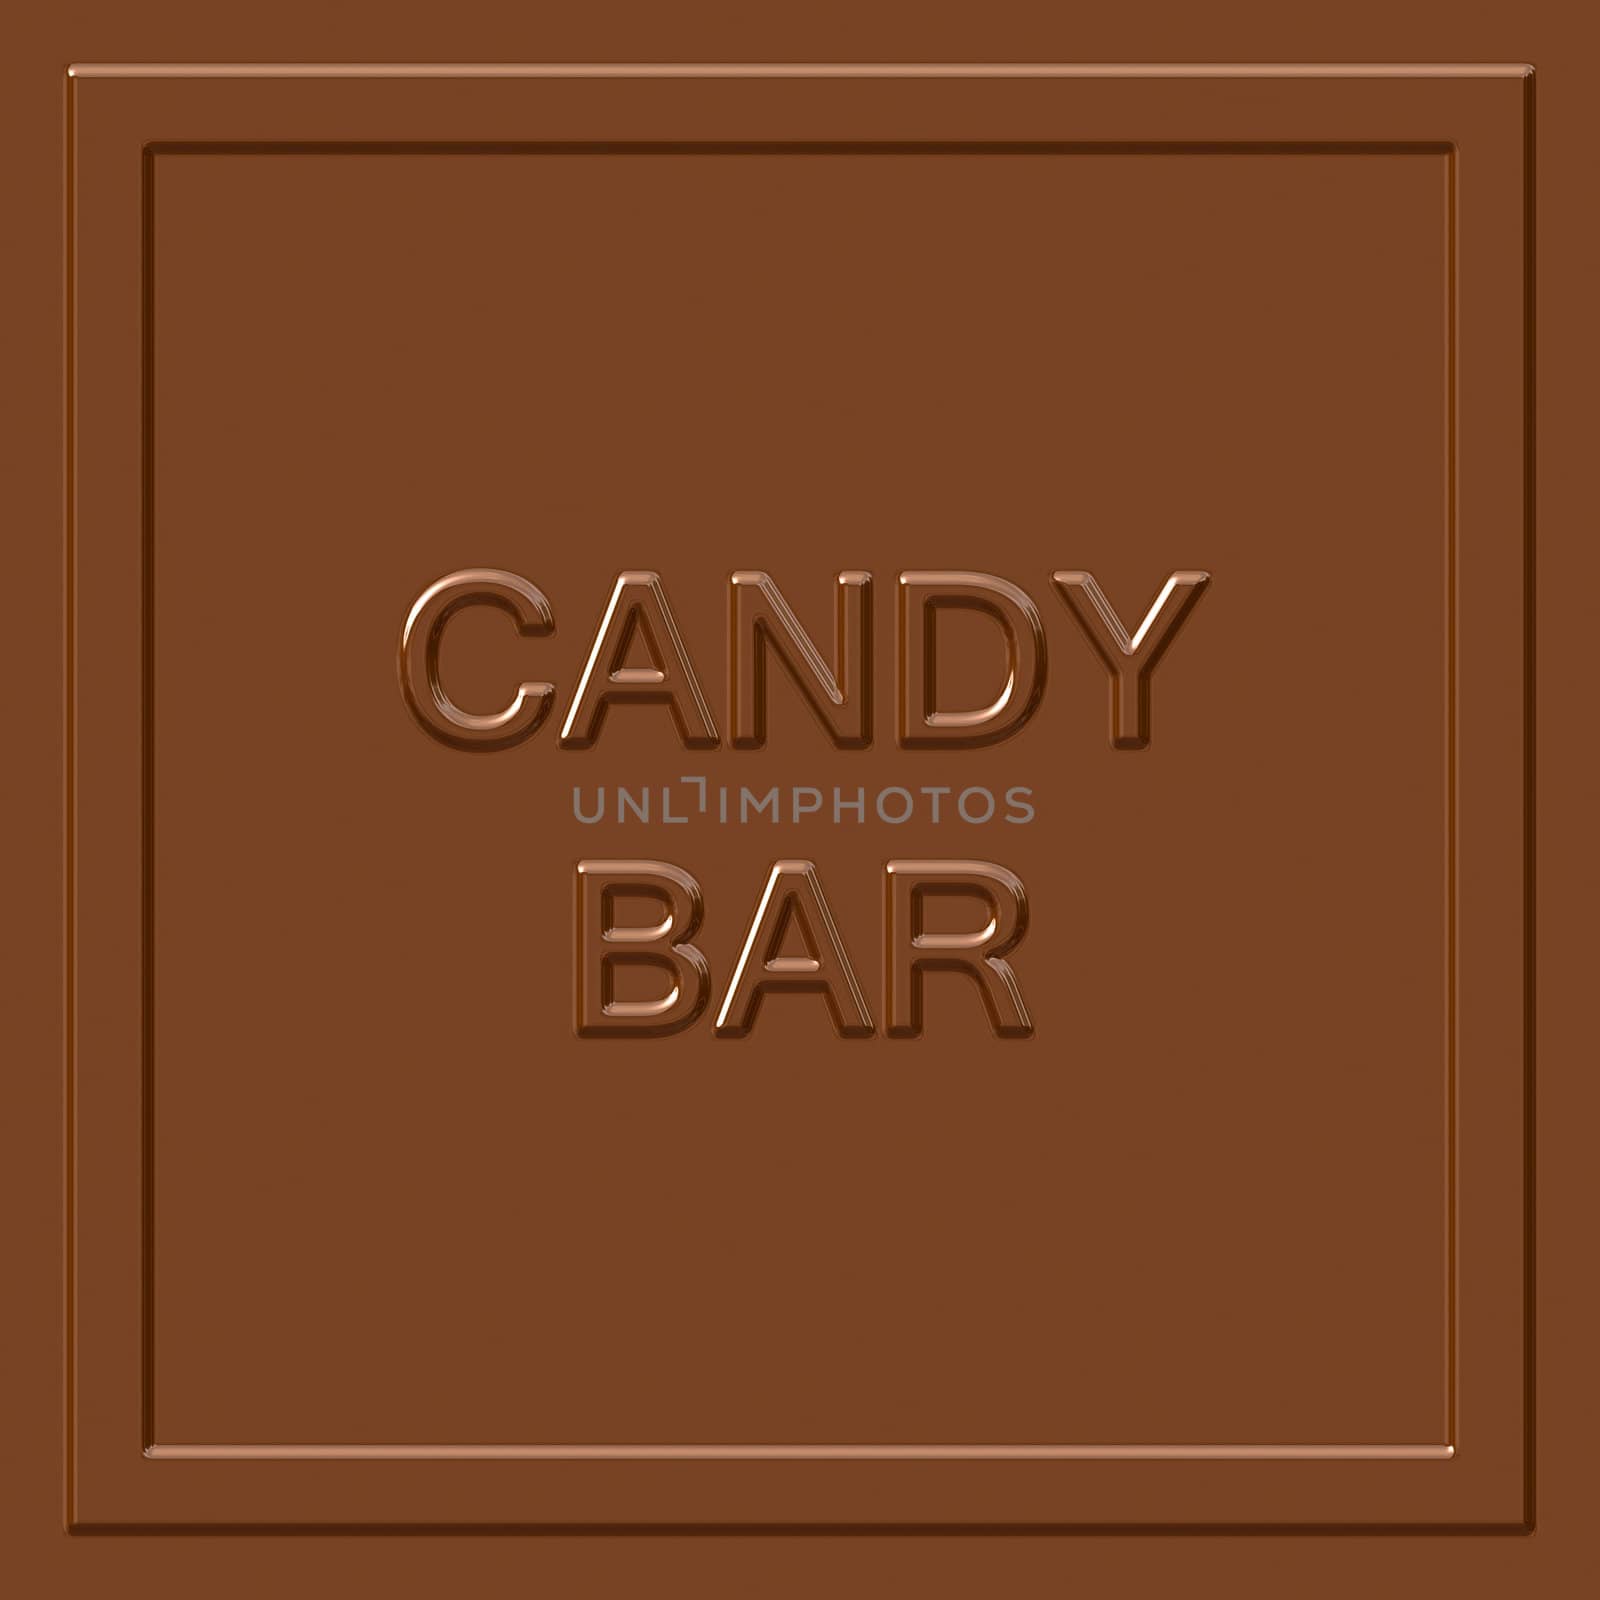 A milk chocolate candy bar square that tiles seamlessly as a pattern to make any background or isolated chocolate bar shape that you need.